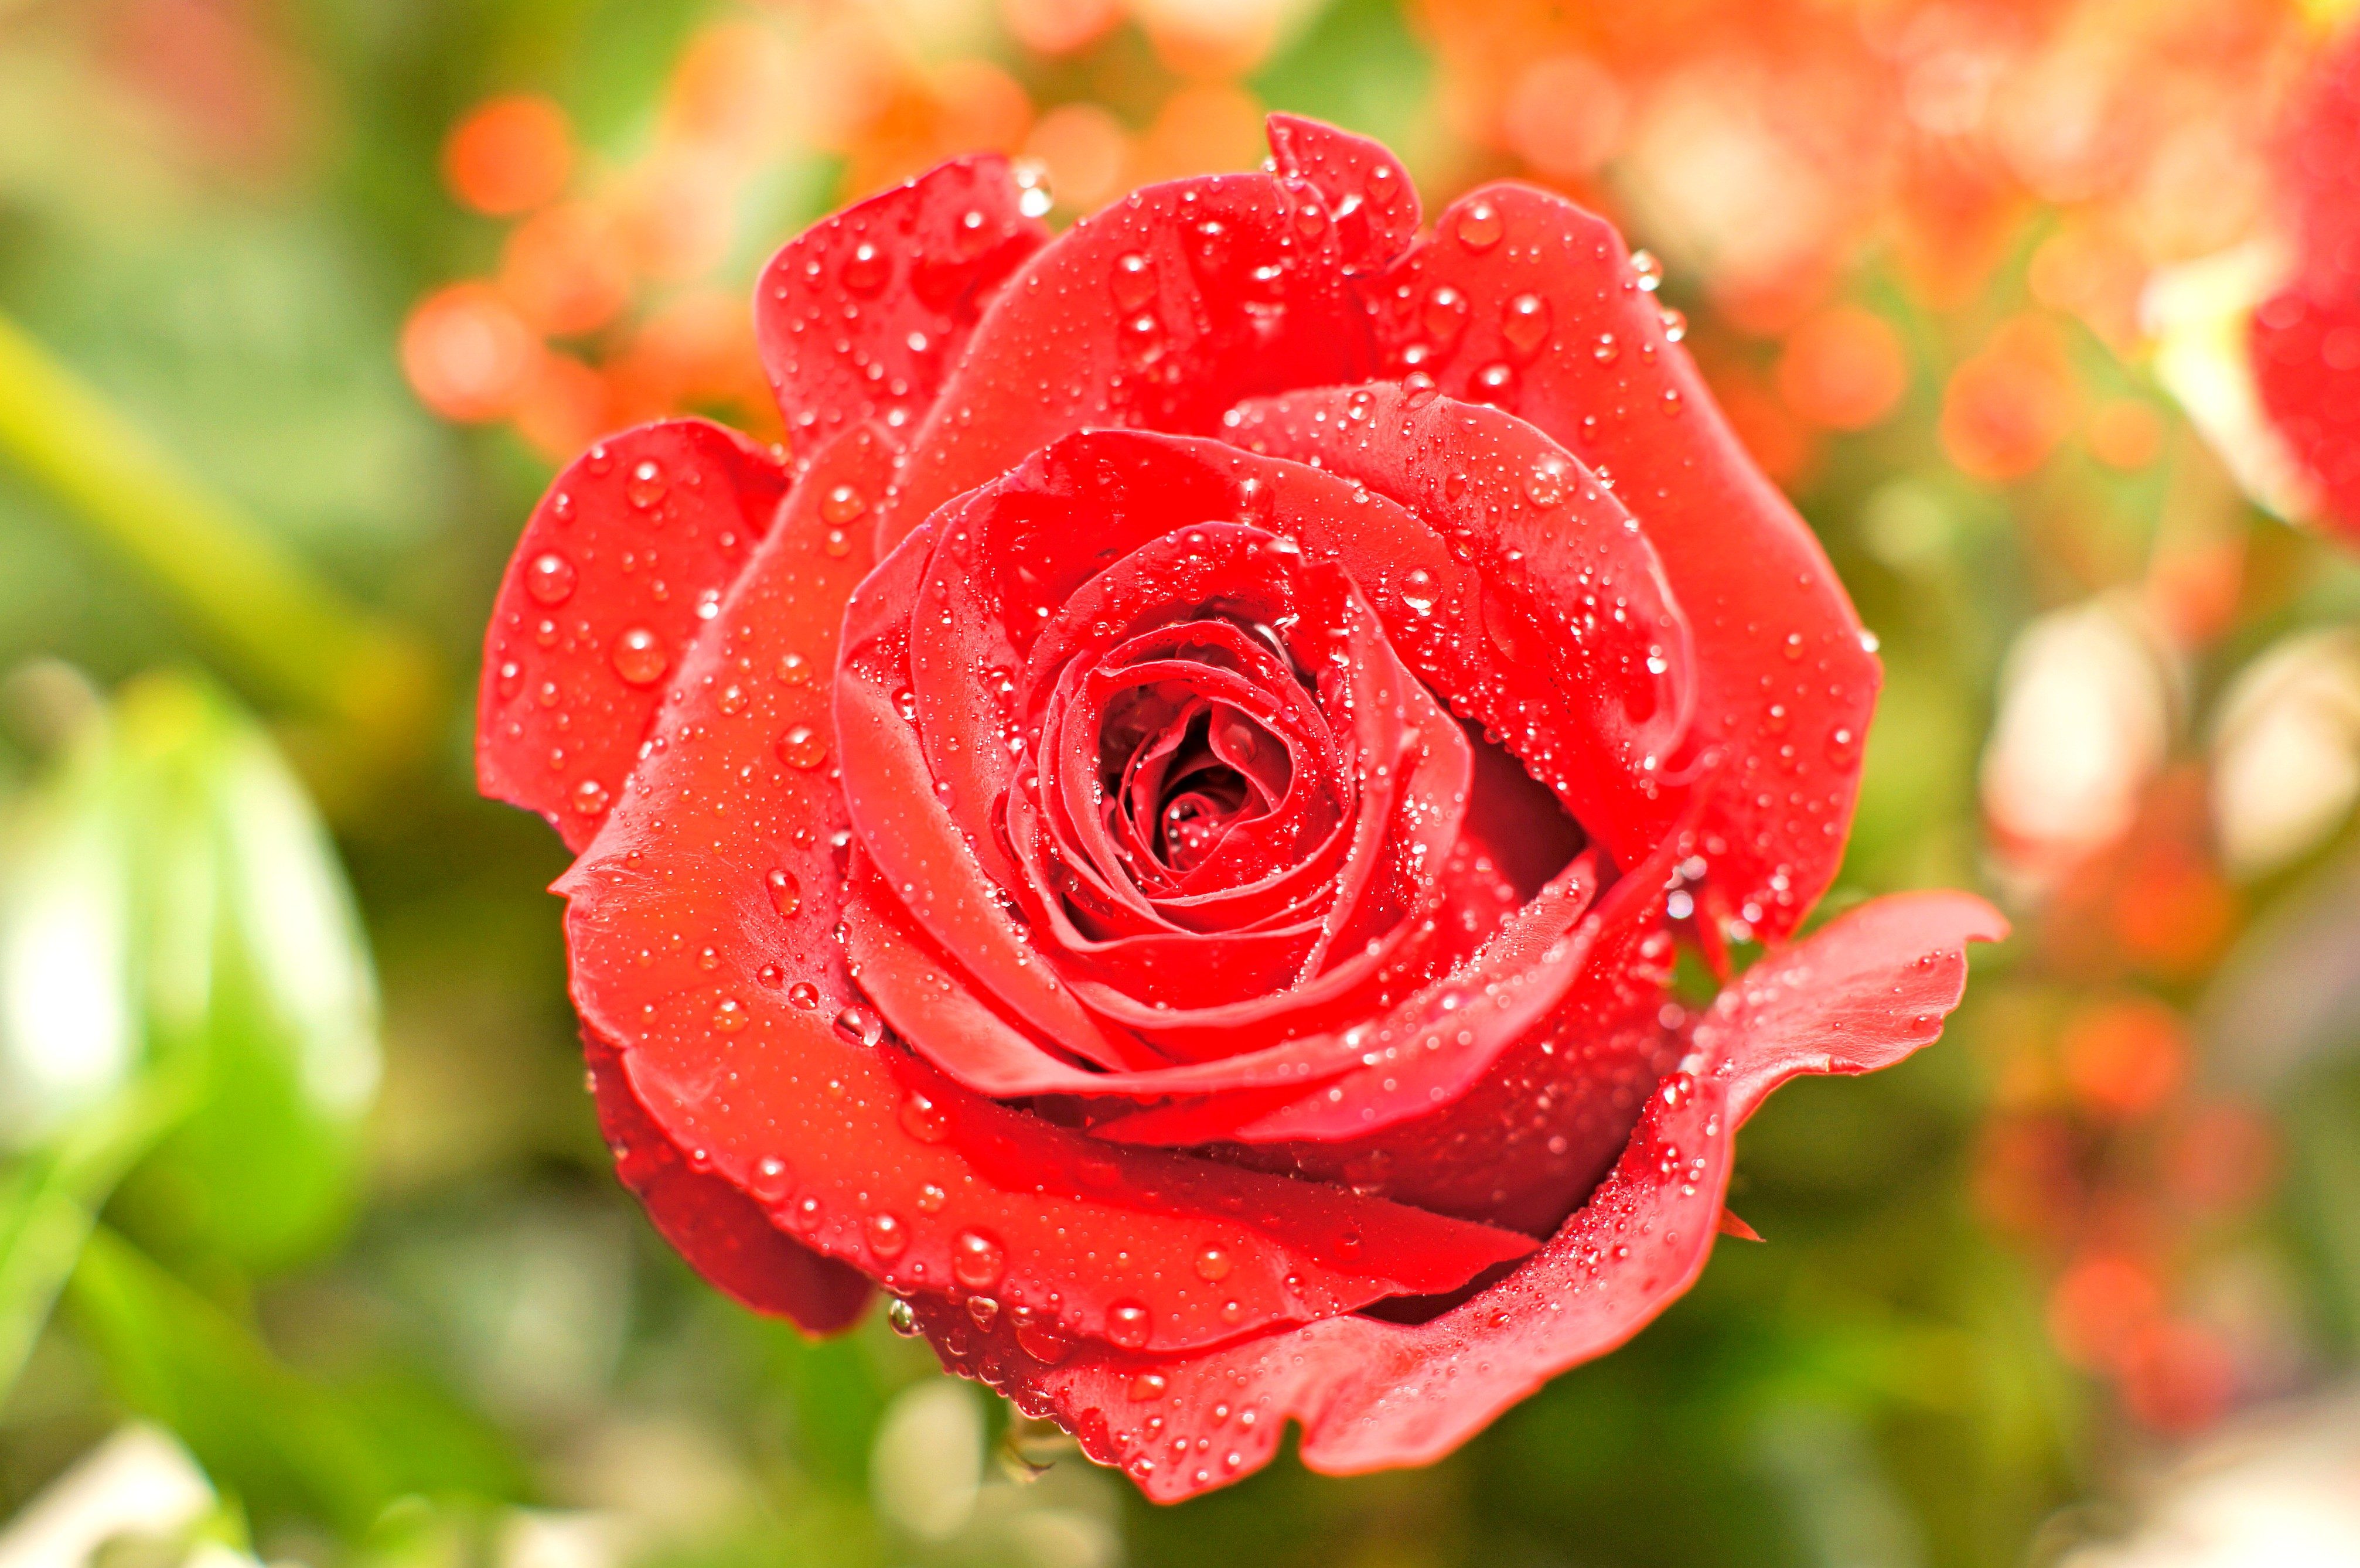 Free picture: red rose, water drops, petals, flower, garden